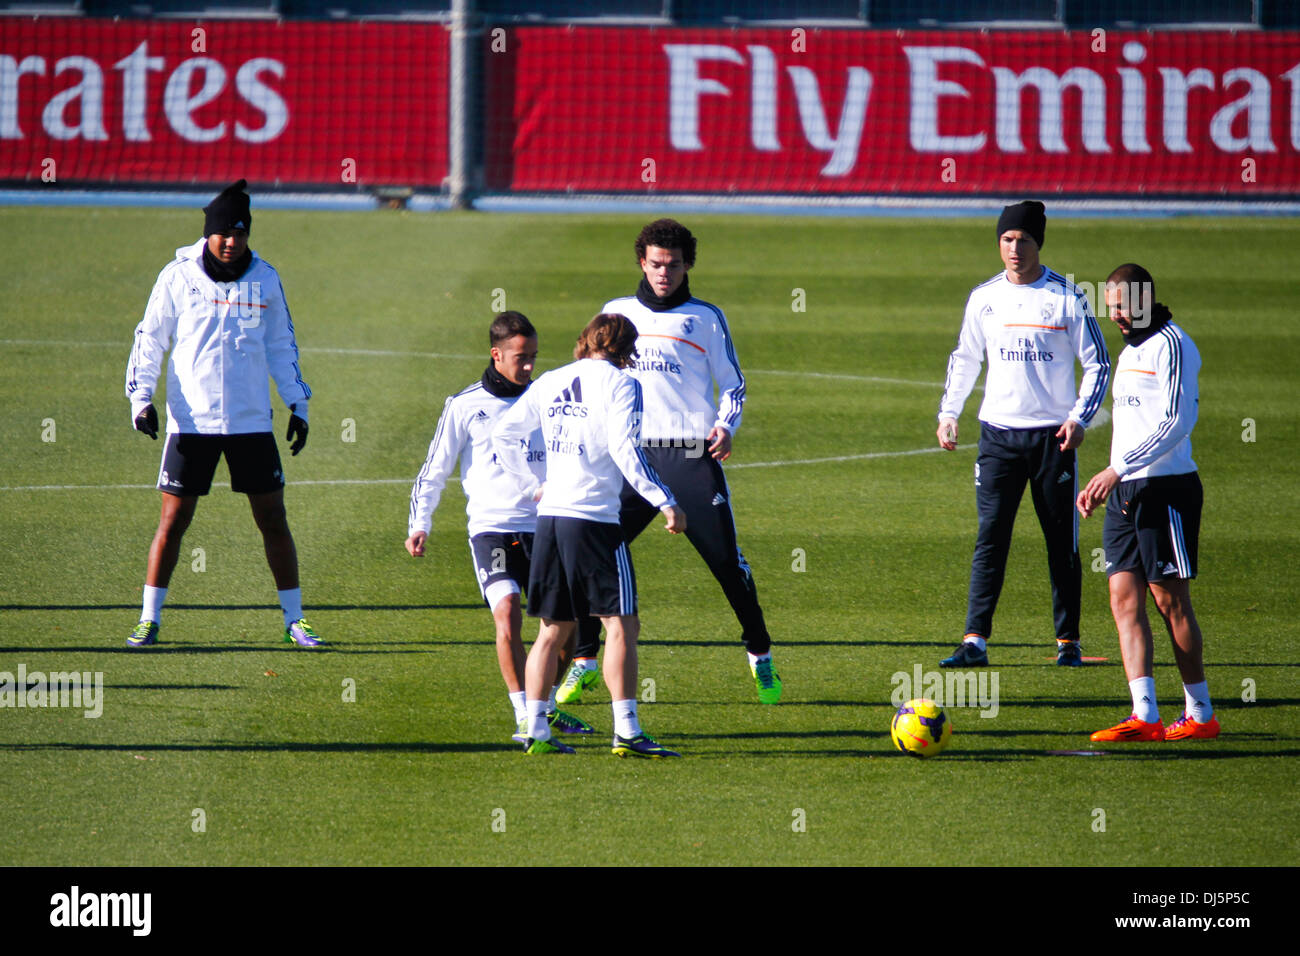 Madrid, Madrid, Spain. 22nd Nov, 2013. (Left to right) Casemiro, Lucas, Modric, Pepe, Cristiano Ronaldo and Benzema at a Real Madrid training session at the Valdebebas sports complex ahead of Liga Matchday 14 between Almeria and Real Madrid, on November 22, 2013 in Madrid, Spain Credit:  Madridismo Sl/Madridismo/ZUMAPRESS.com/Alamy Live News Stock Photo